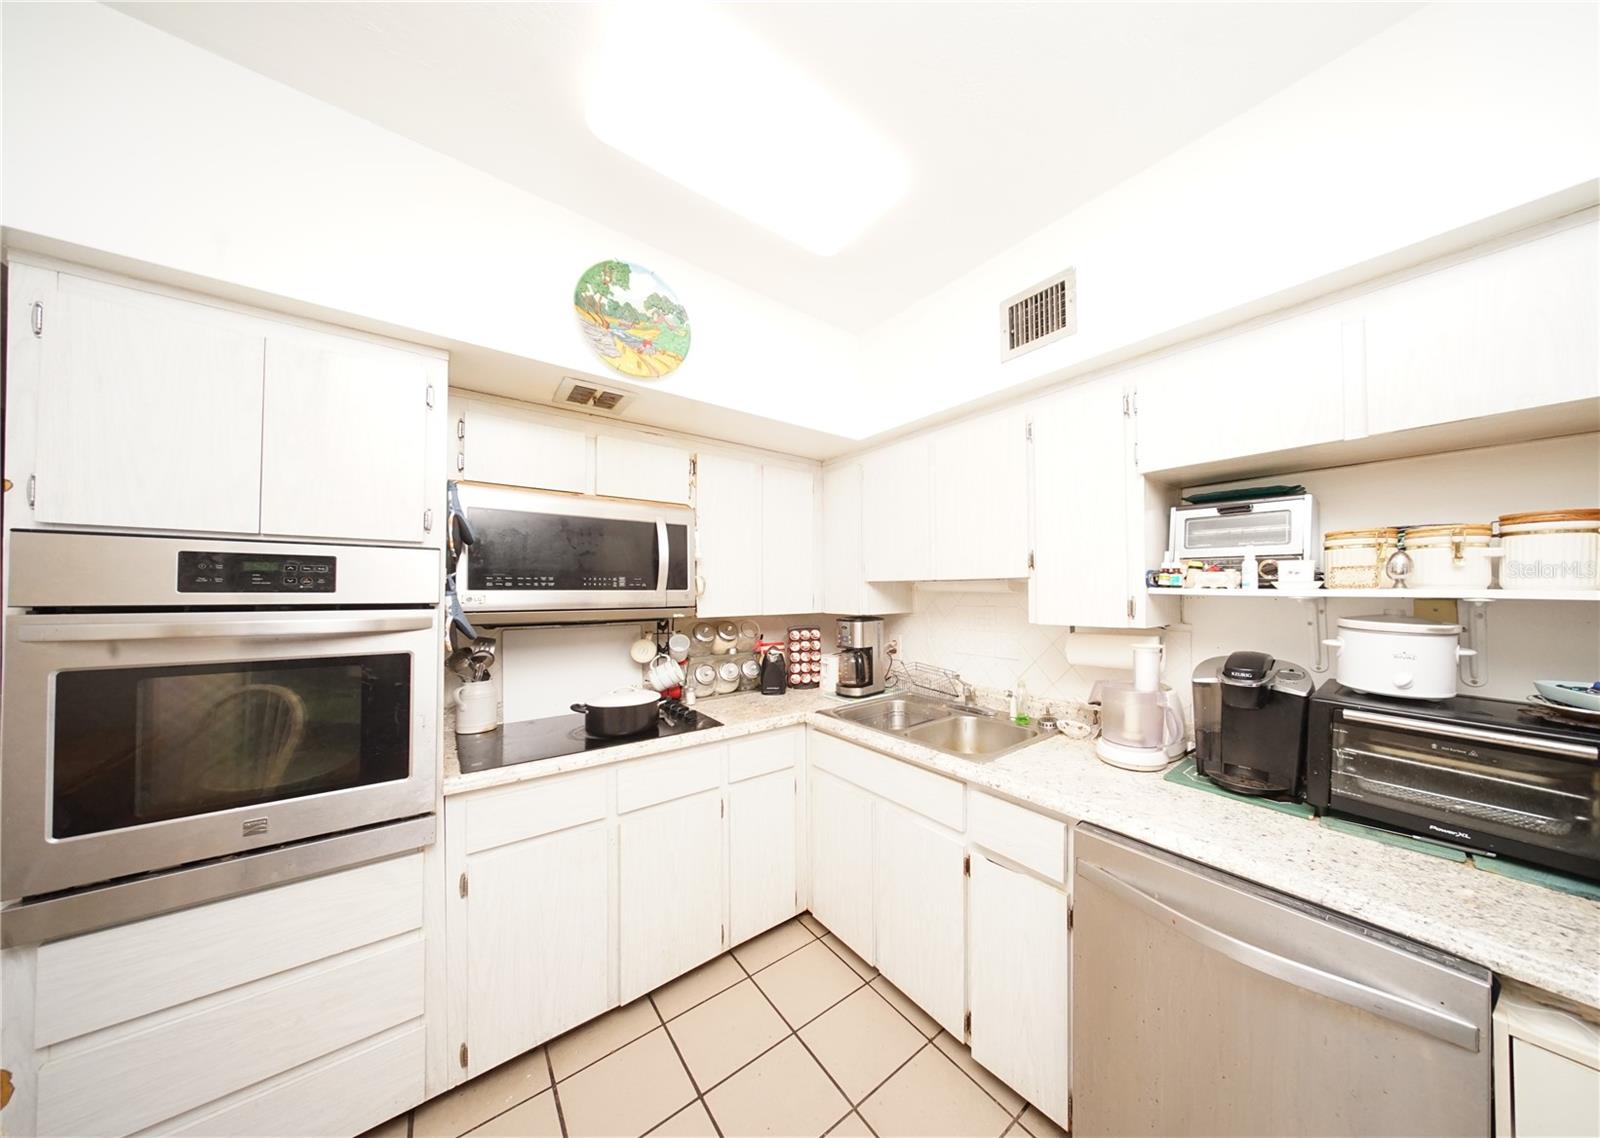 Kitchen with Ceramic Tile Flooring, Newer Stainless-Steet Dishwasher, Newer Stainless-Steel Microwave, Newer Stainless-Steel Built-in Oven and Sliding Glass Door that open to Spacious Florida Room